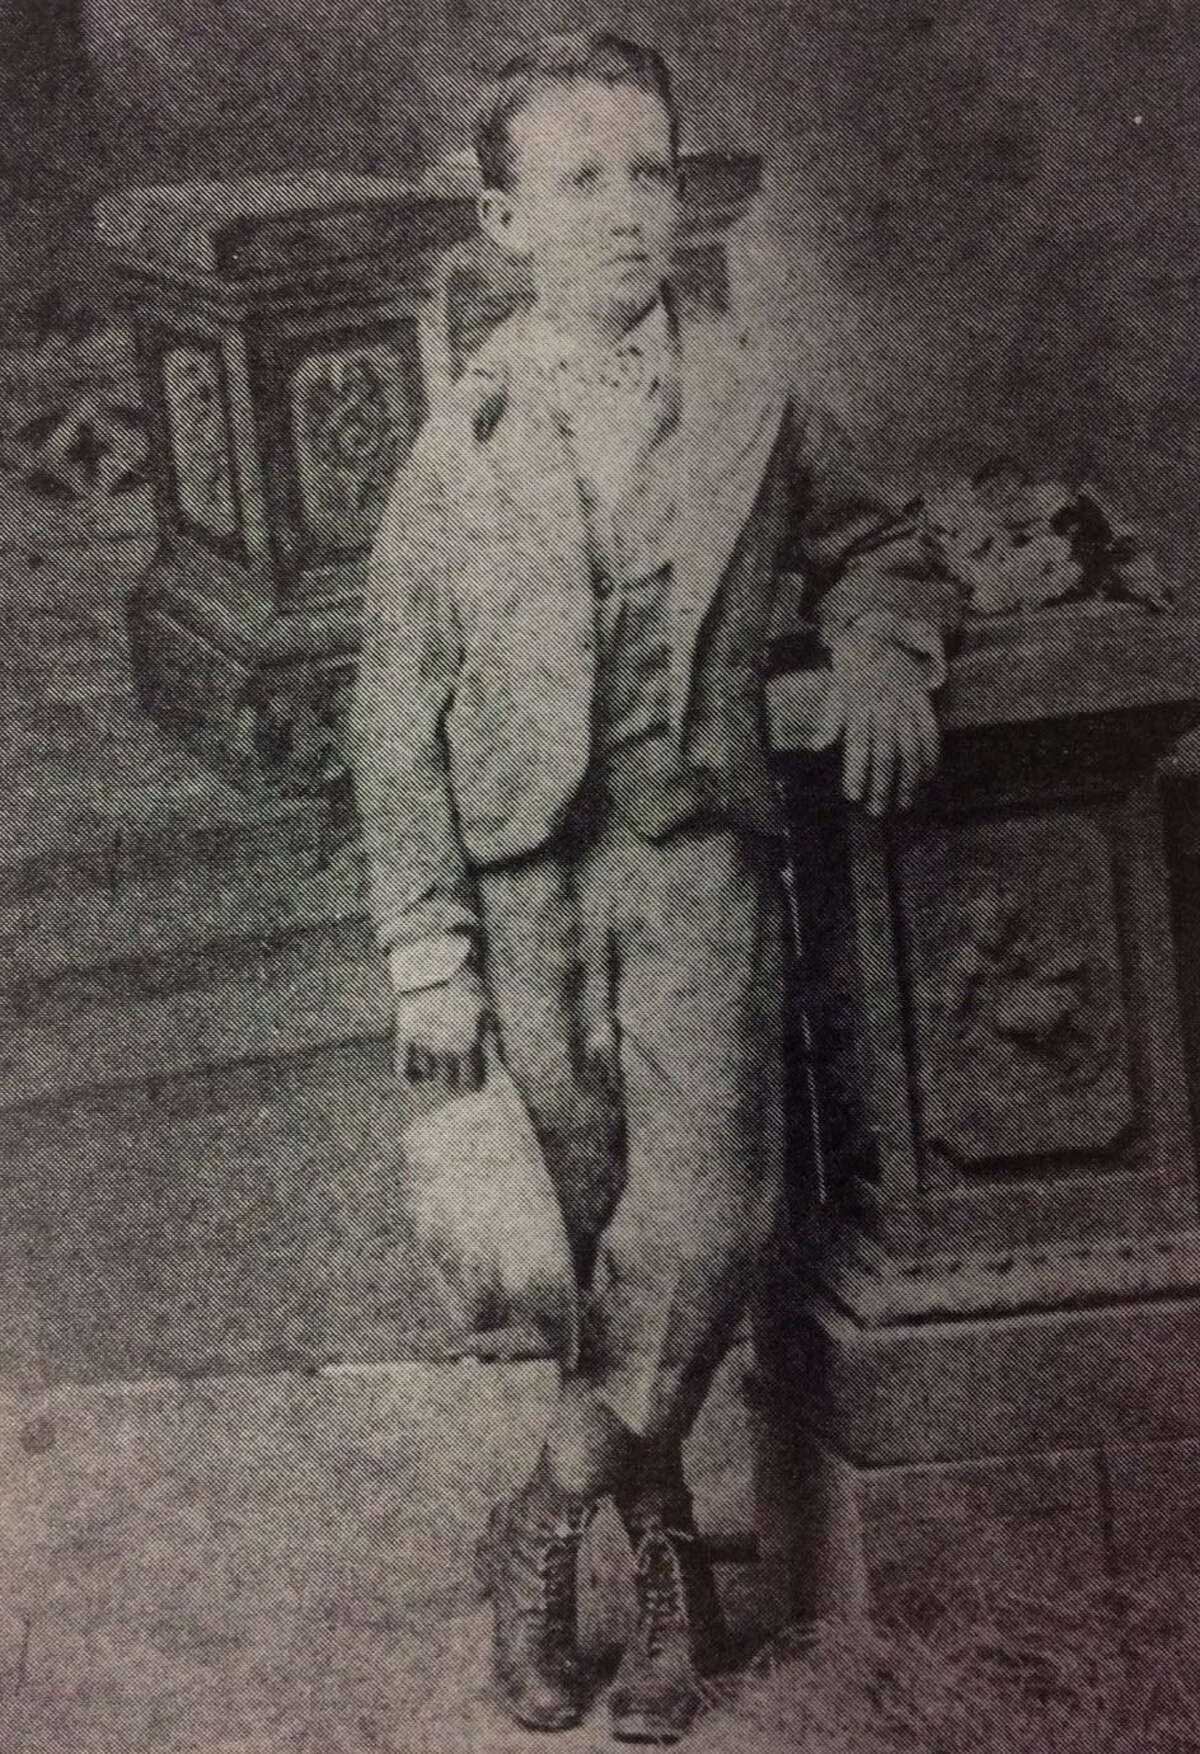 William Munger Conroe, Isaac Conroe's son, as a boy. William Munger Conroe took over his father's mill after his death and carried on his father's community service in many ways.